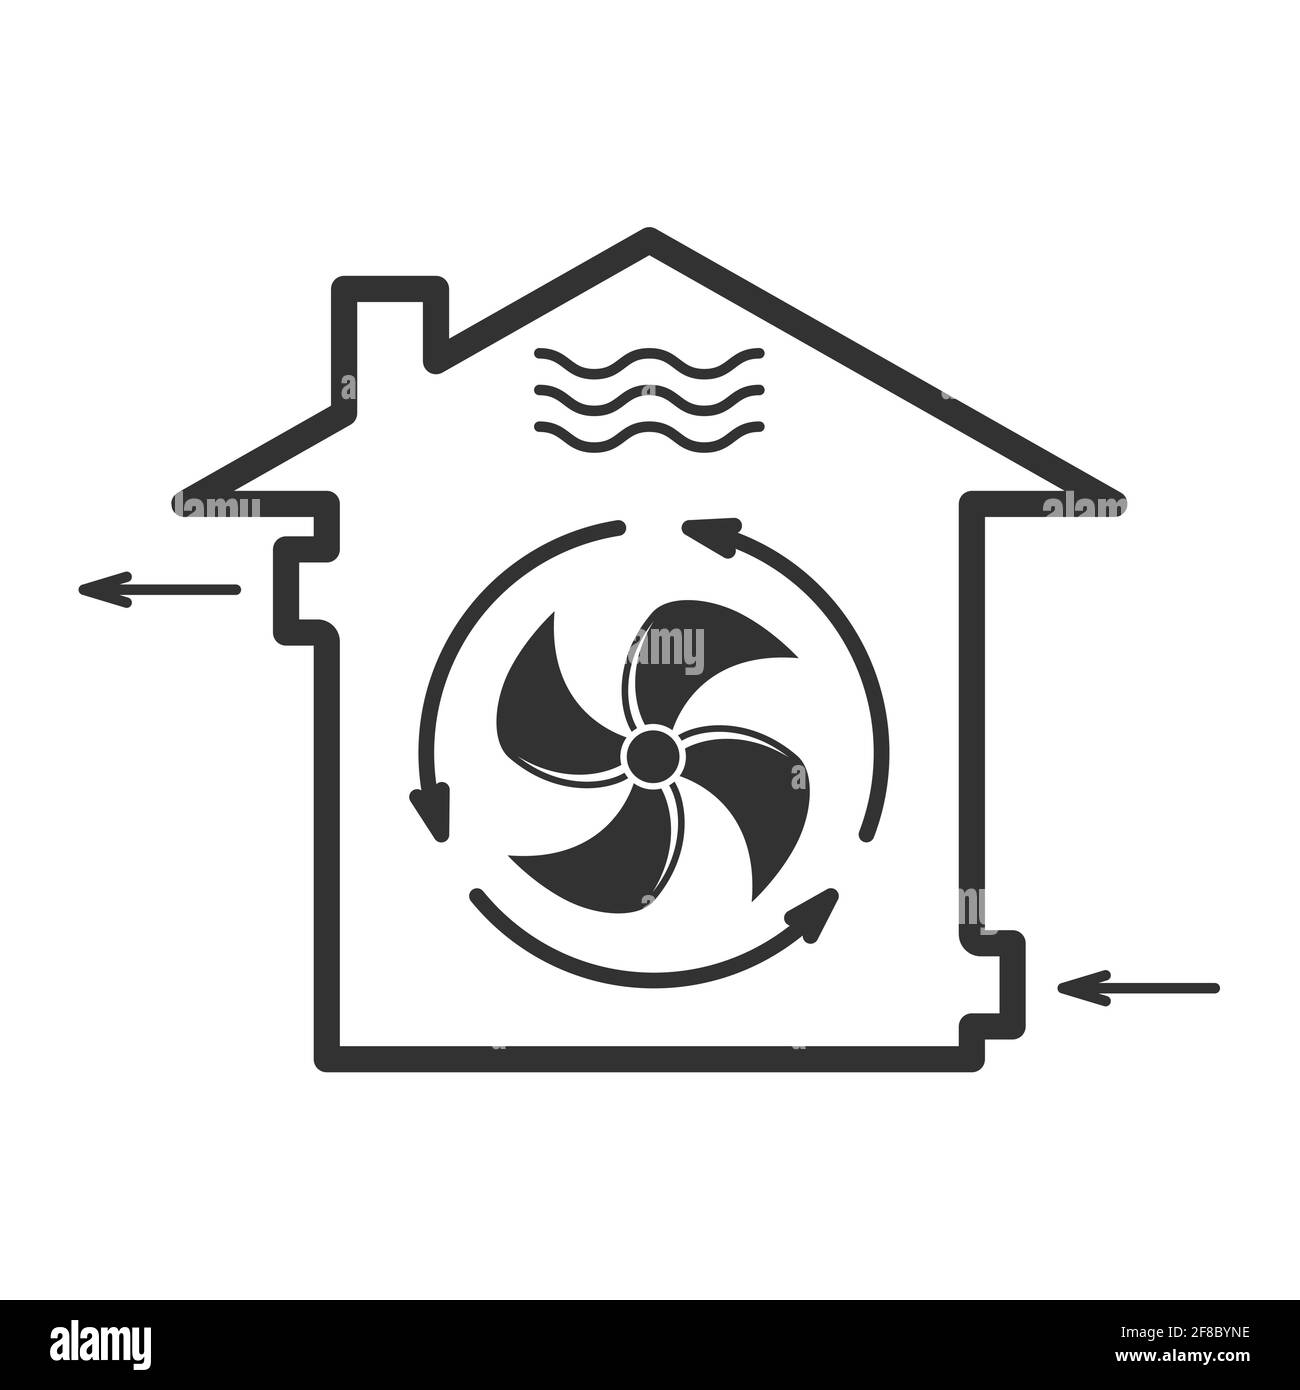 House forced ventilation system icon, mechanical fanning of building, airing sign, vector Stock Vector